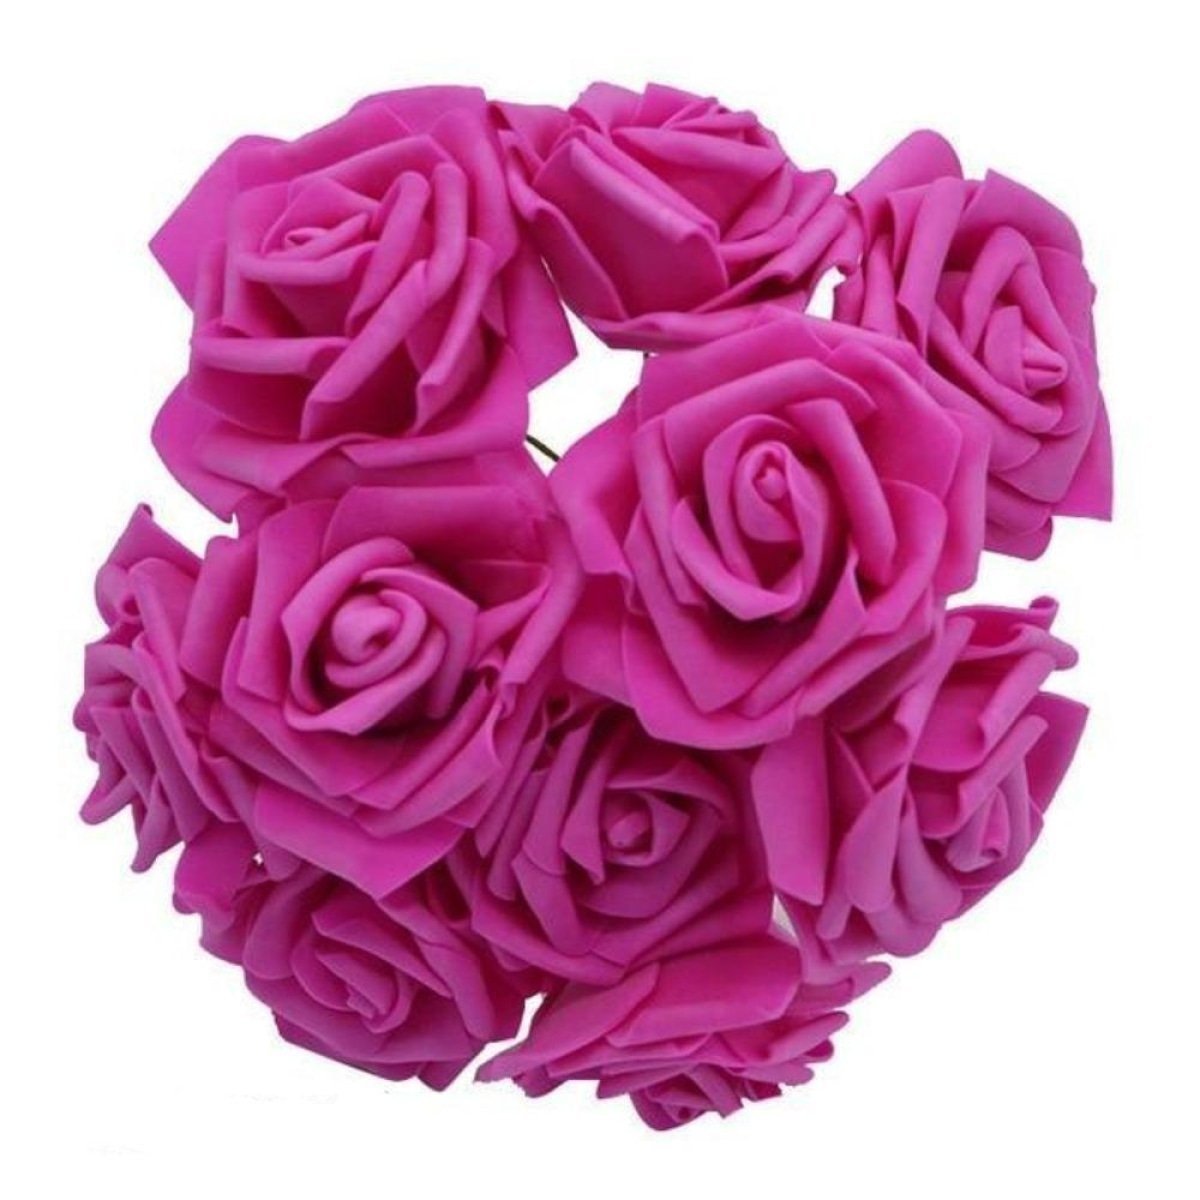 20pcs 7cm Artificial Flowers with Stems Foam Rose Fake Bride Bouquet Wedding - Rose Red / Dark Pink - - Asia Sell